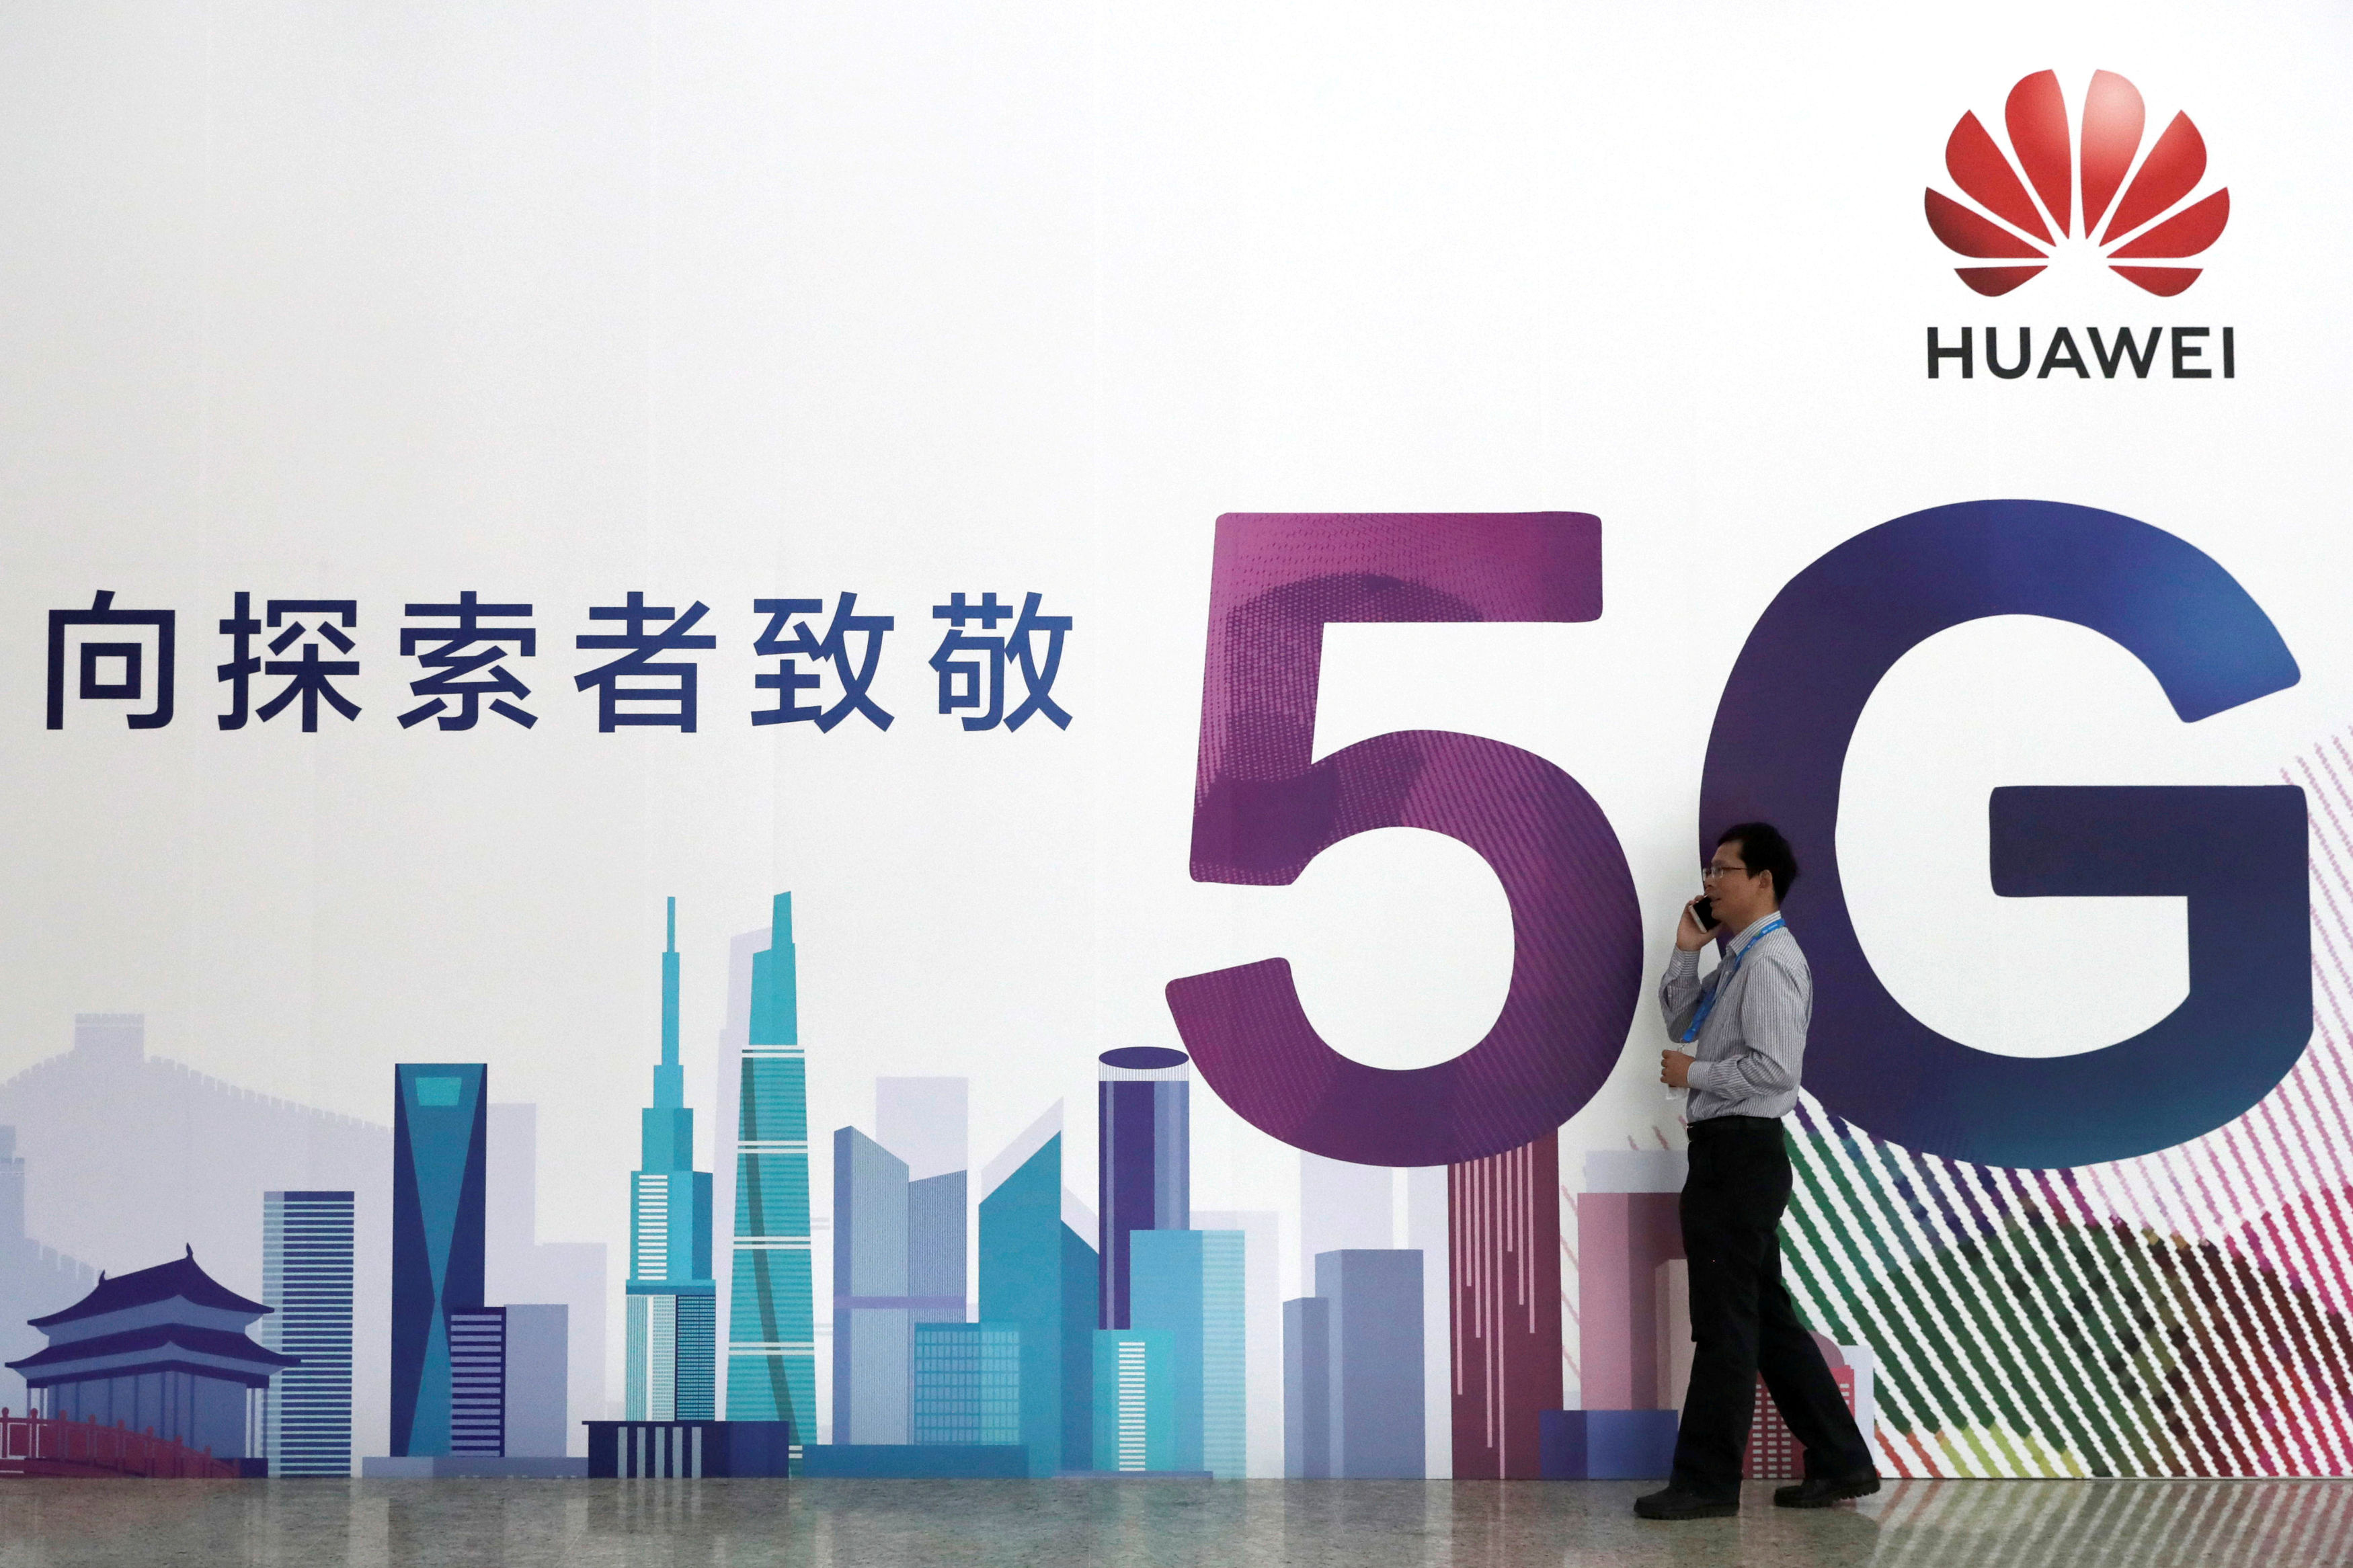 FILE PHOTO: A man talks on his mobile phone beside Huawei's billboard featuring 5G technology at the PT Expo in Beijing